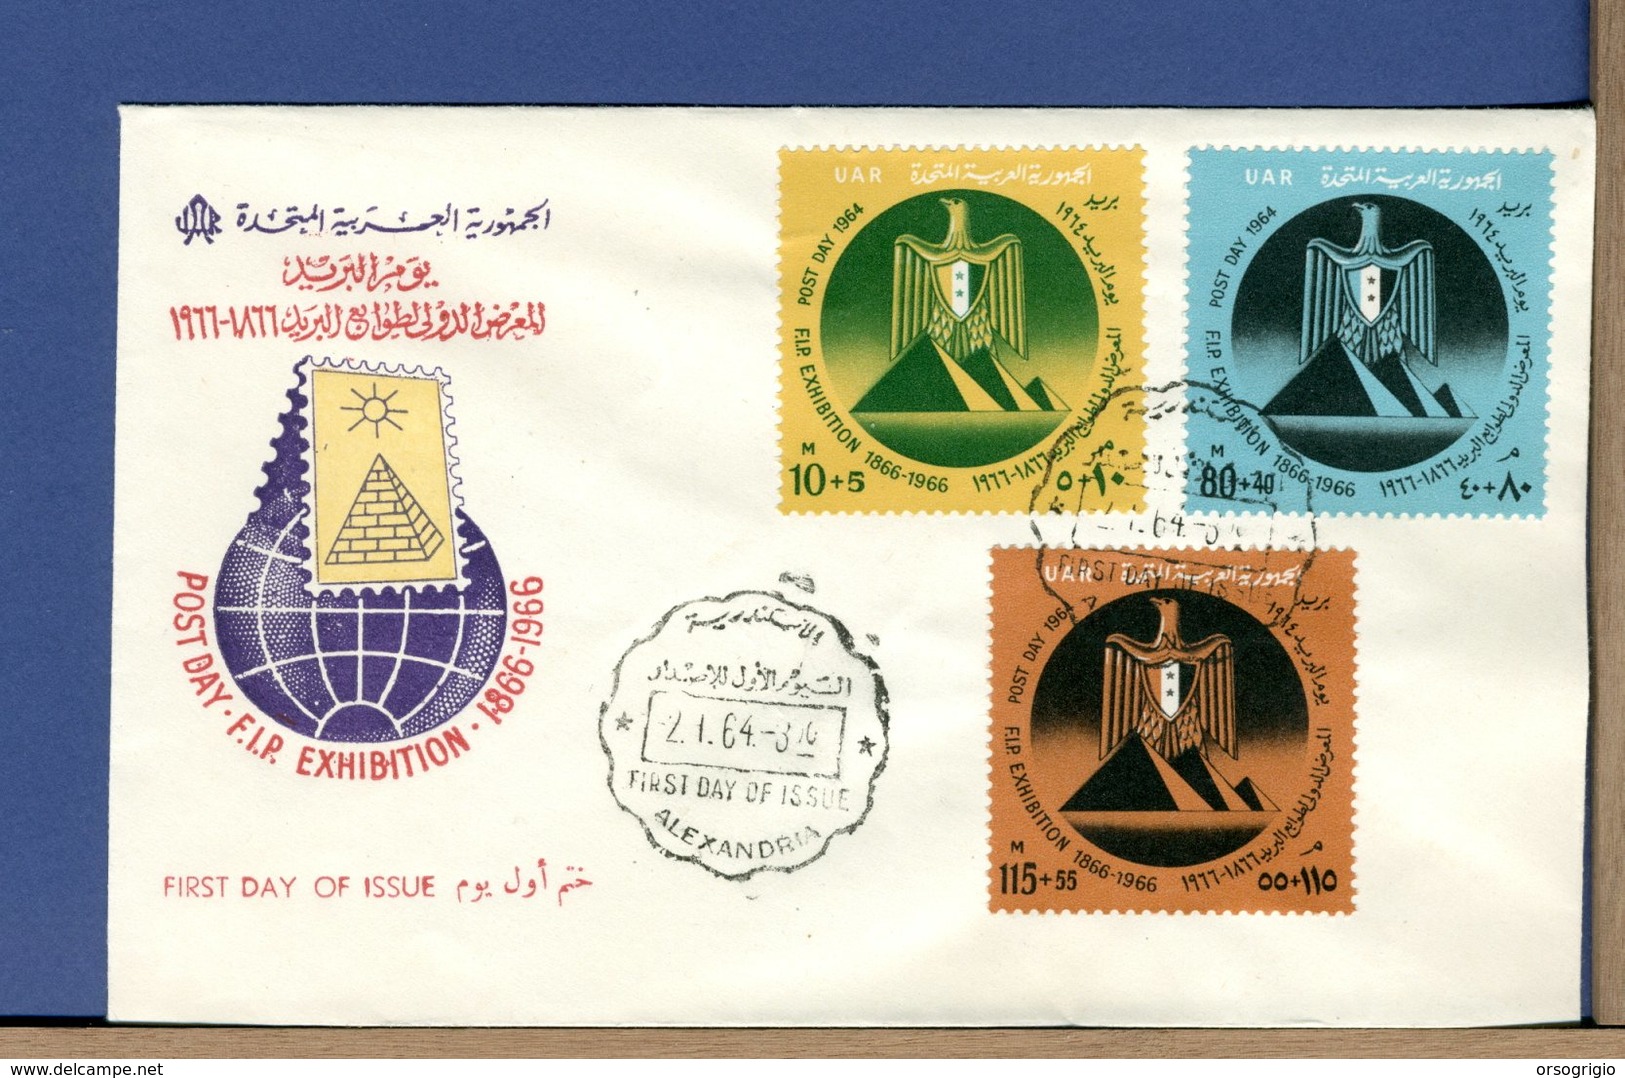 EGITTO - UAR - EGYPT - 1964 -  POST DAY - FIP EXHIBITION - FDC - Covers & Documents